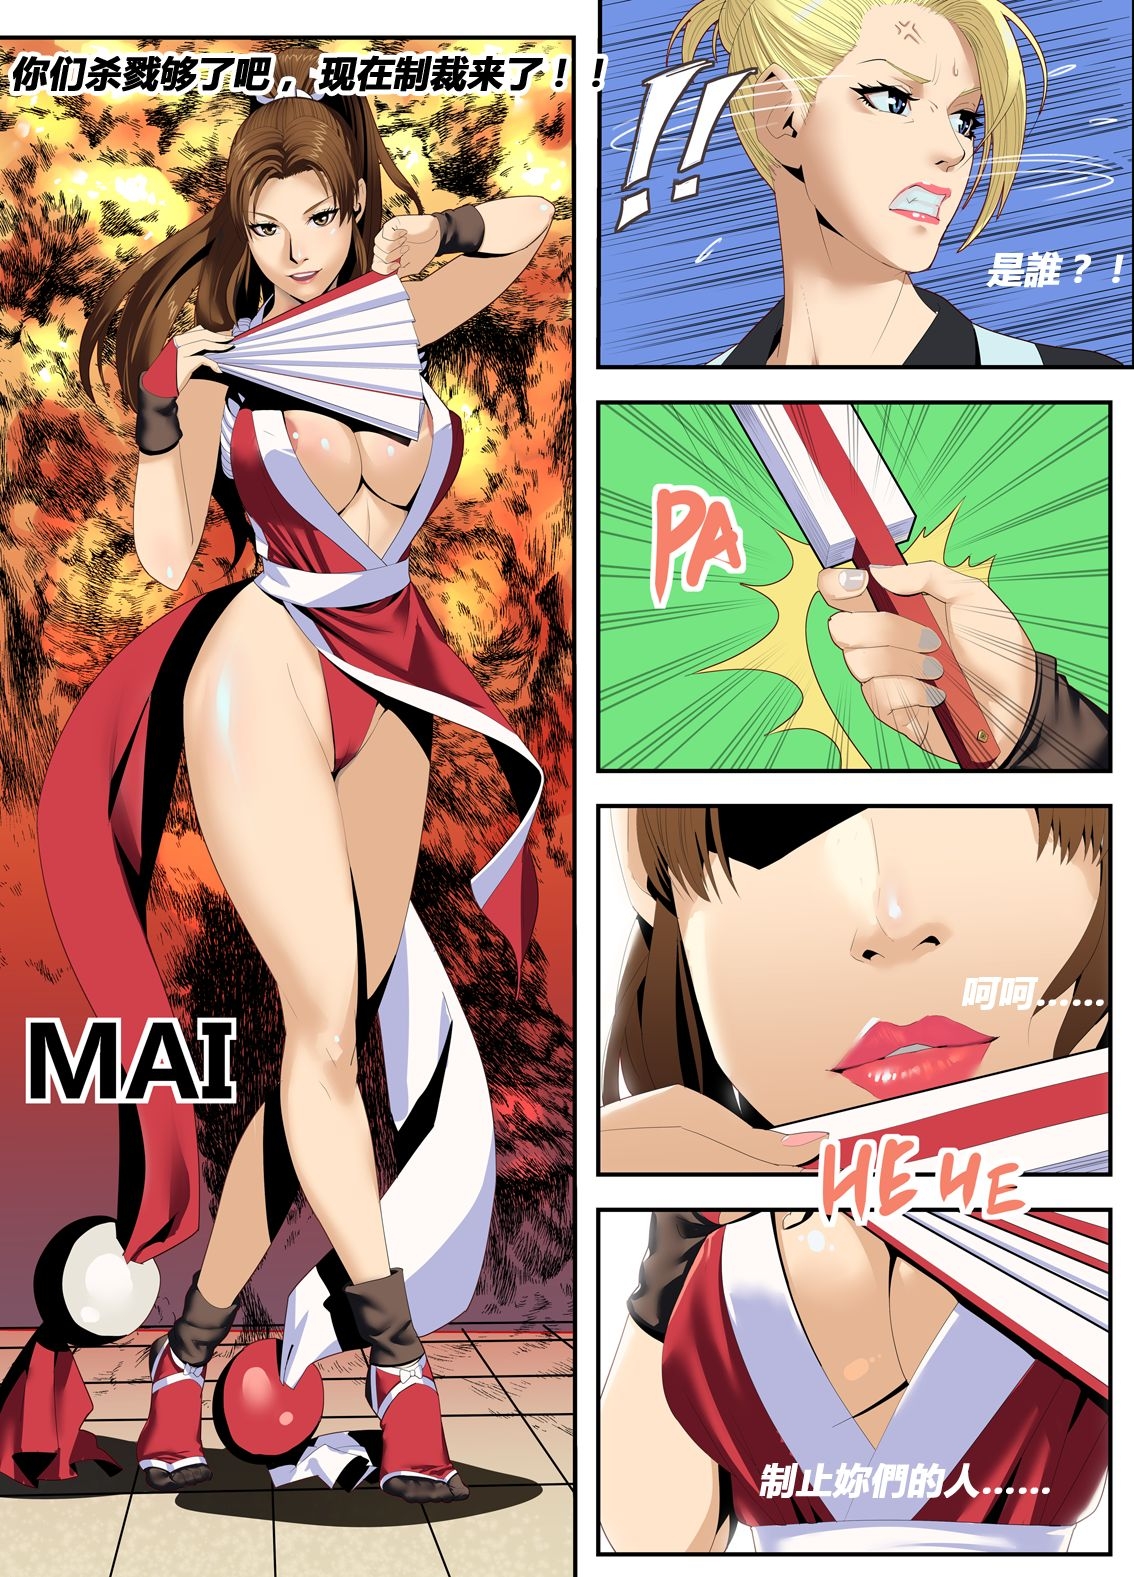 [chunlieater] The Lust of Mai Shiranui (King of Fighters) [Chinese] 4